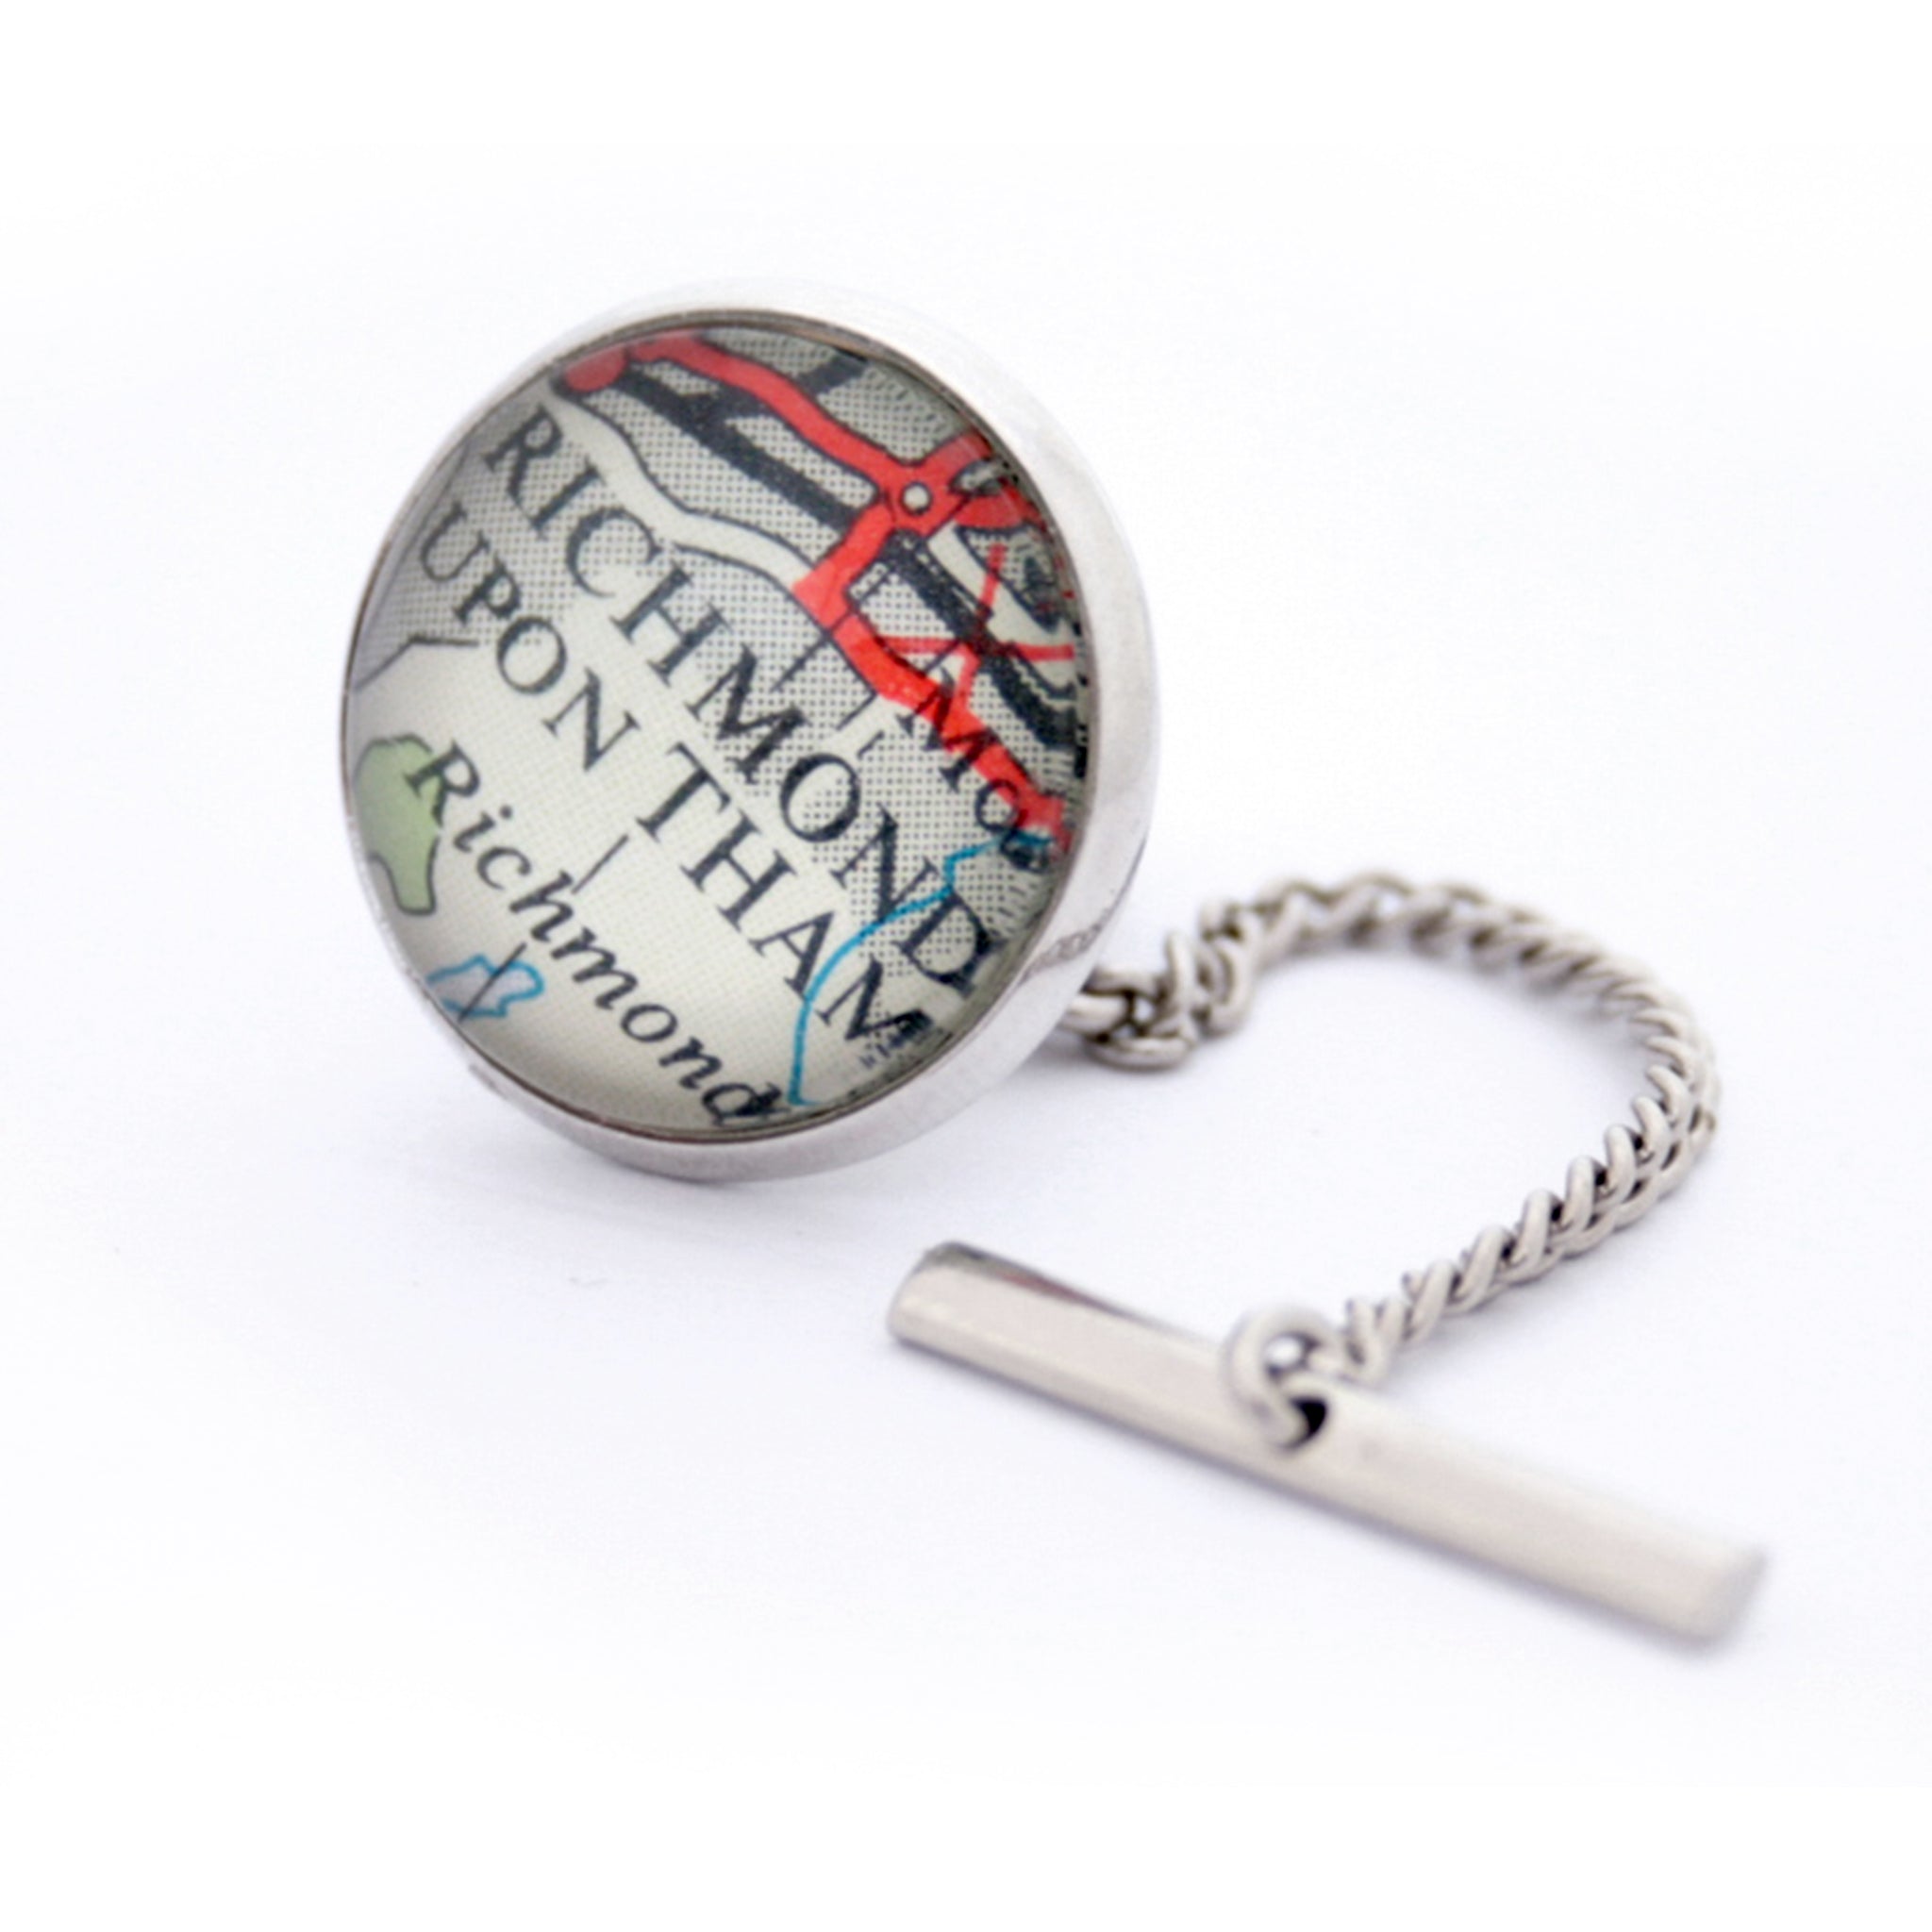 Personalised Tie Tack in silver colour featuring parts of London